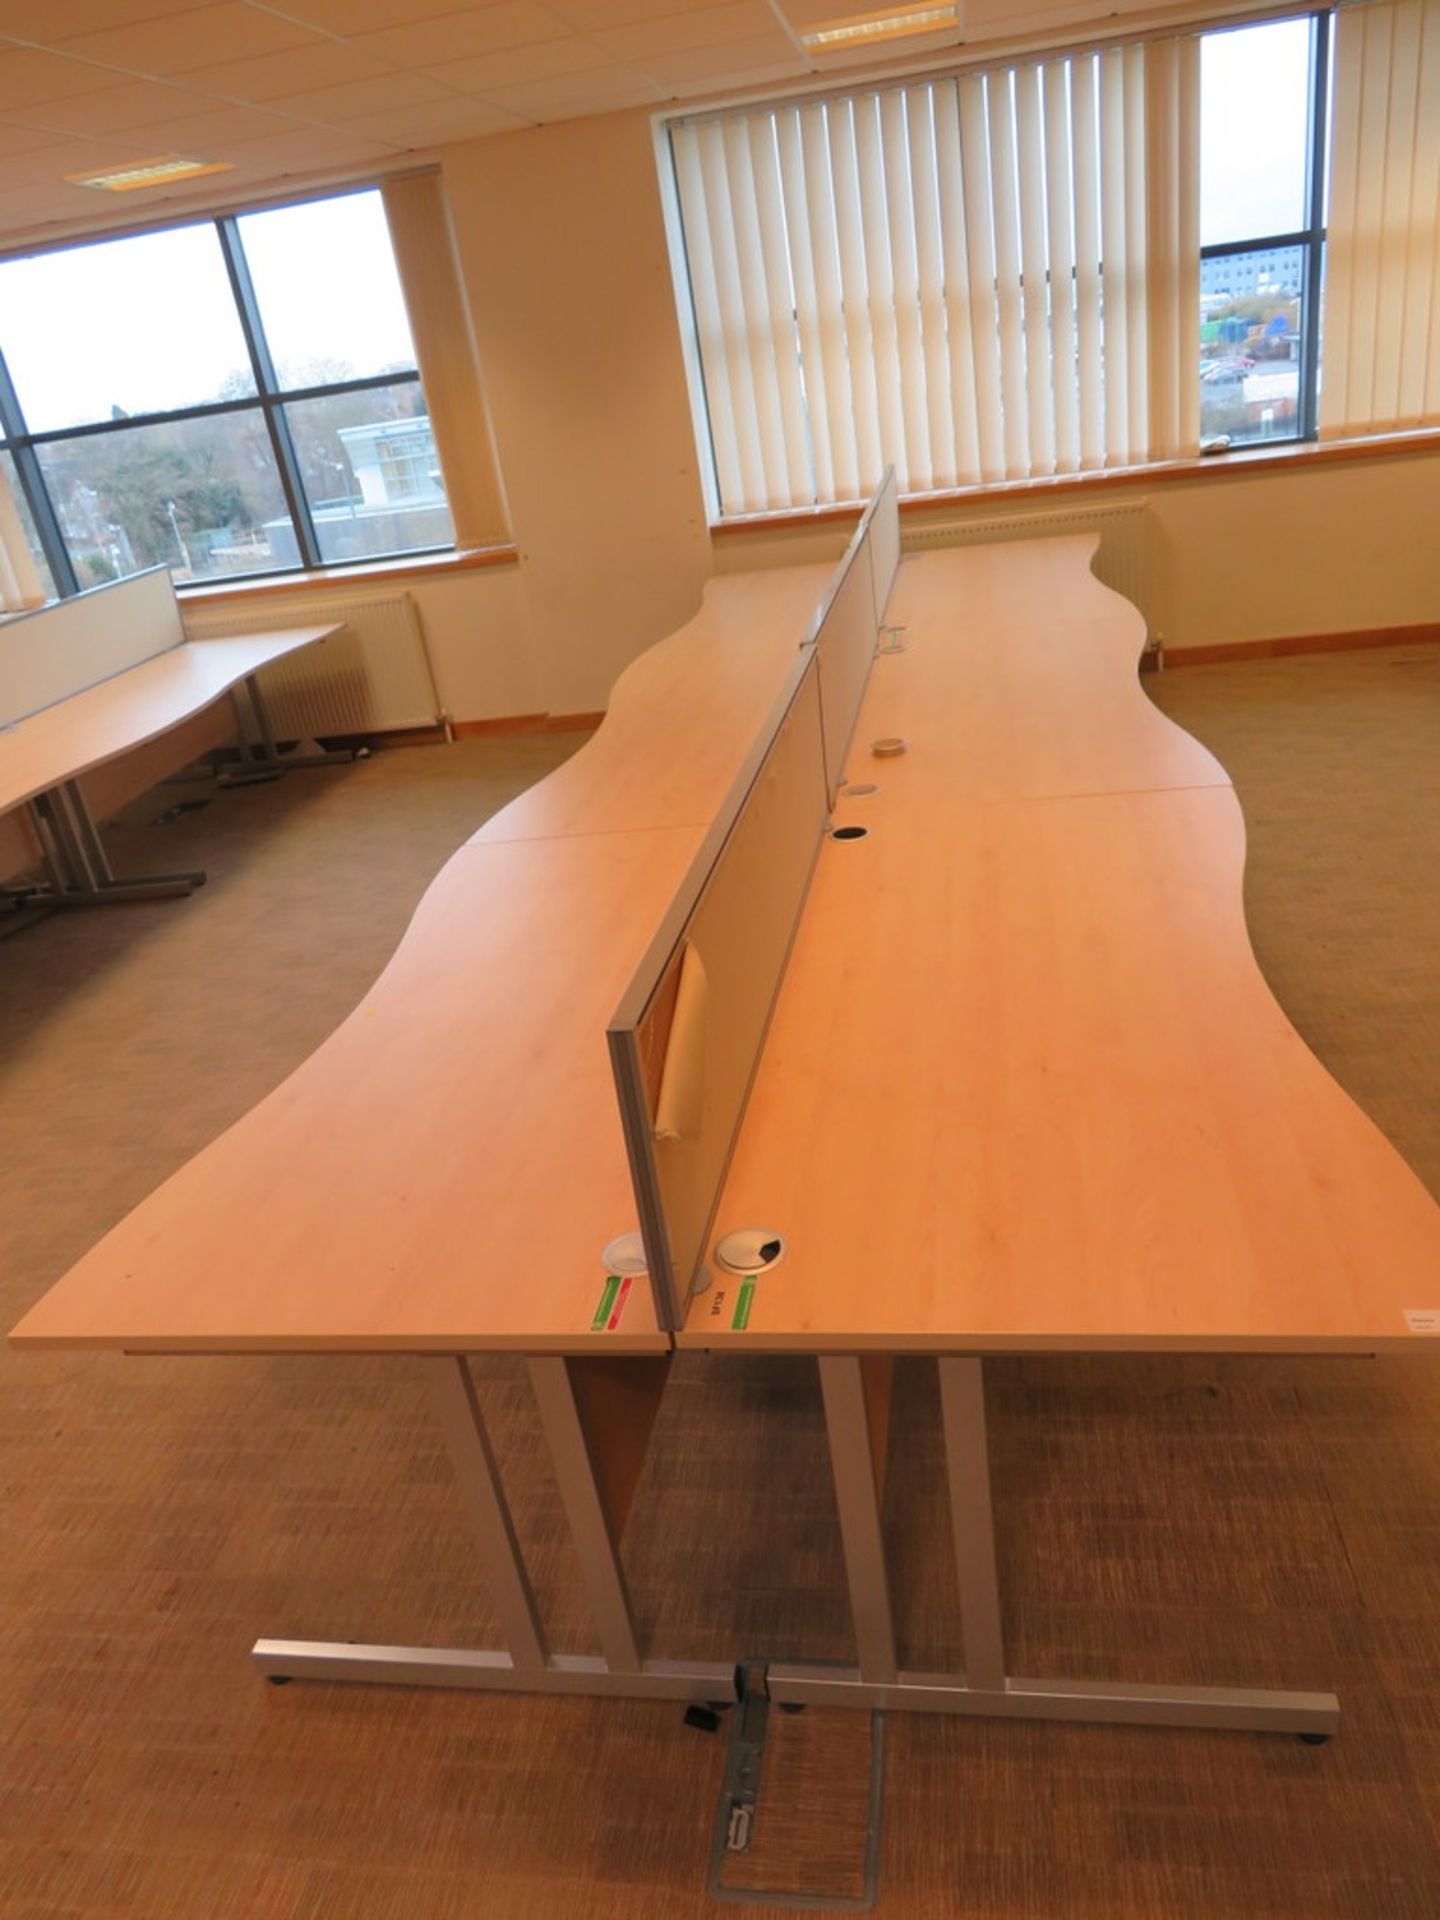 6 X LIGHTWOOD EFFECT CURVED FRONT OFFICE DESKS AND 3 X DESK DIVIDERS - Image 2 of 3